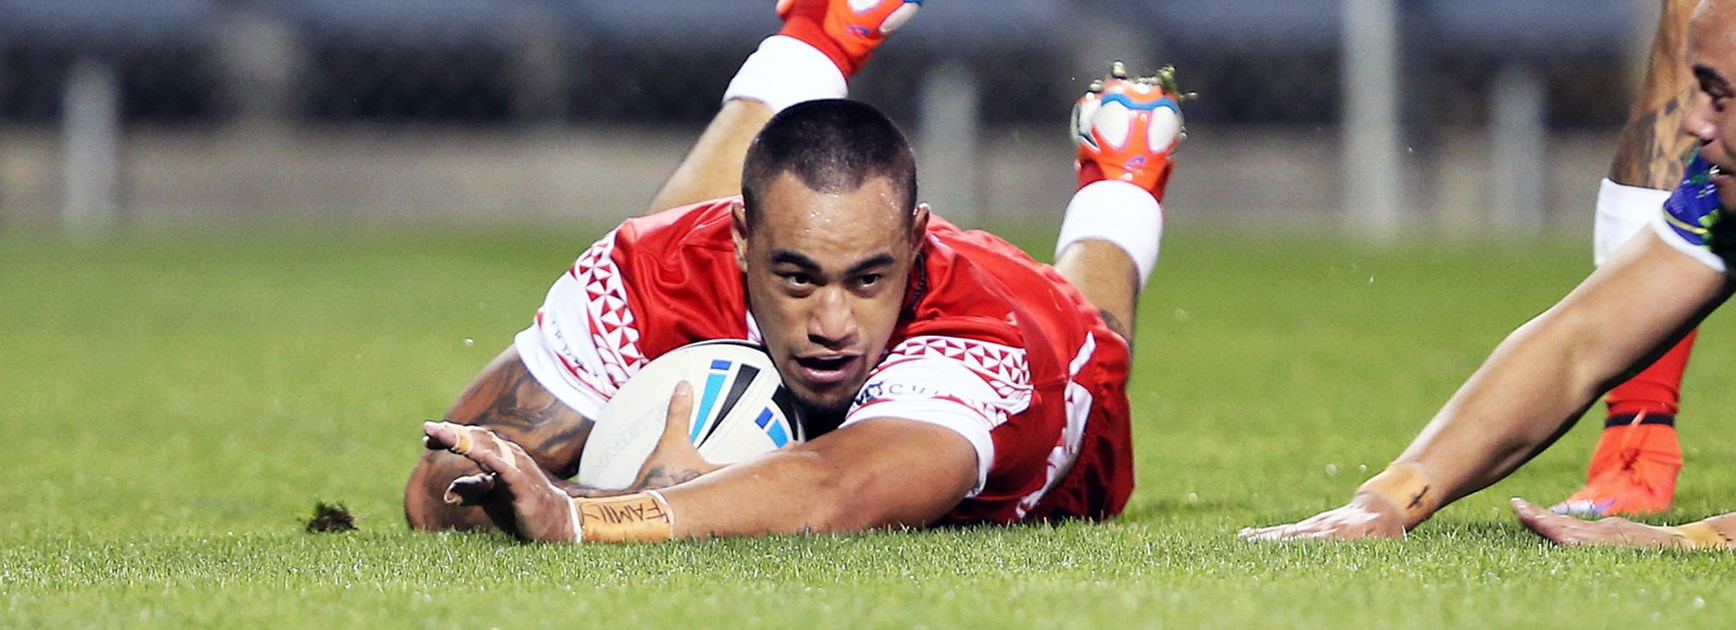 Mahe Fonua crossed for a try in Tonga's World Cup qualifier against Cooks Islands.